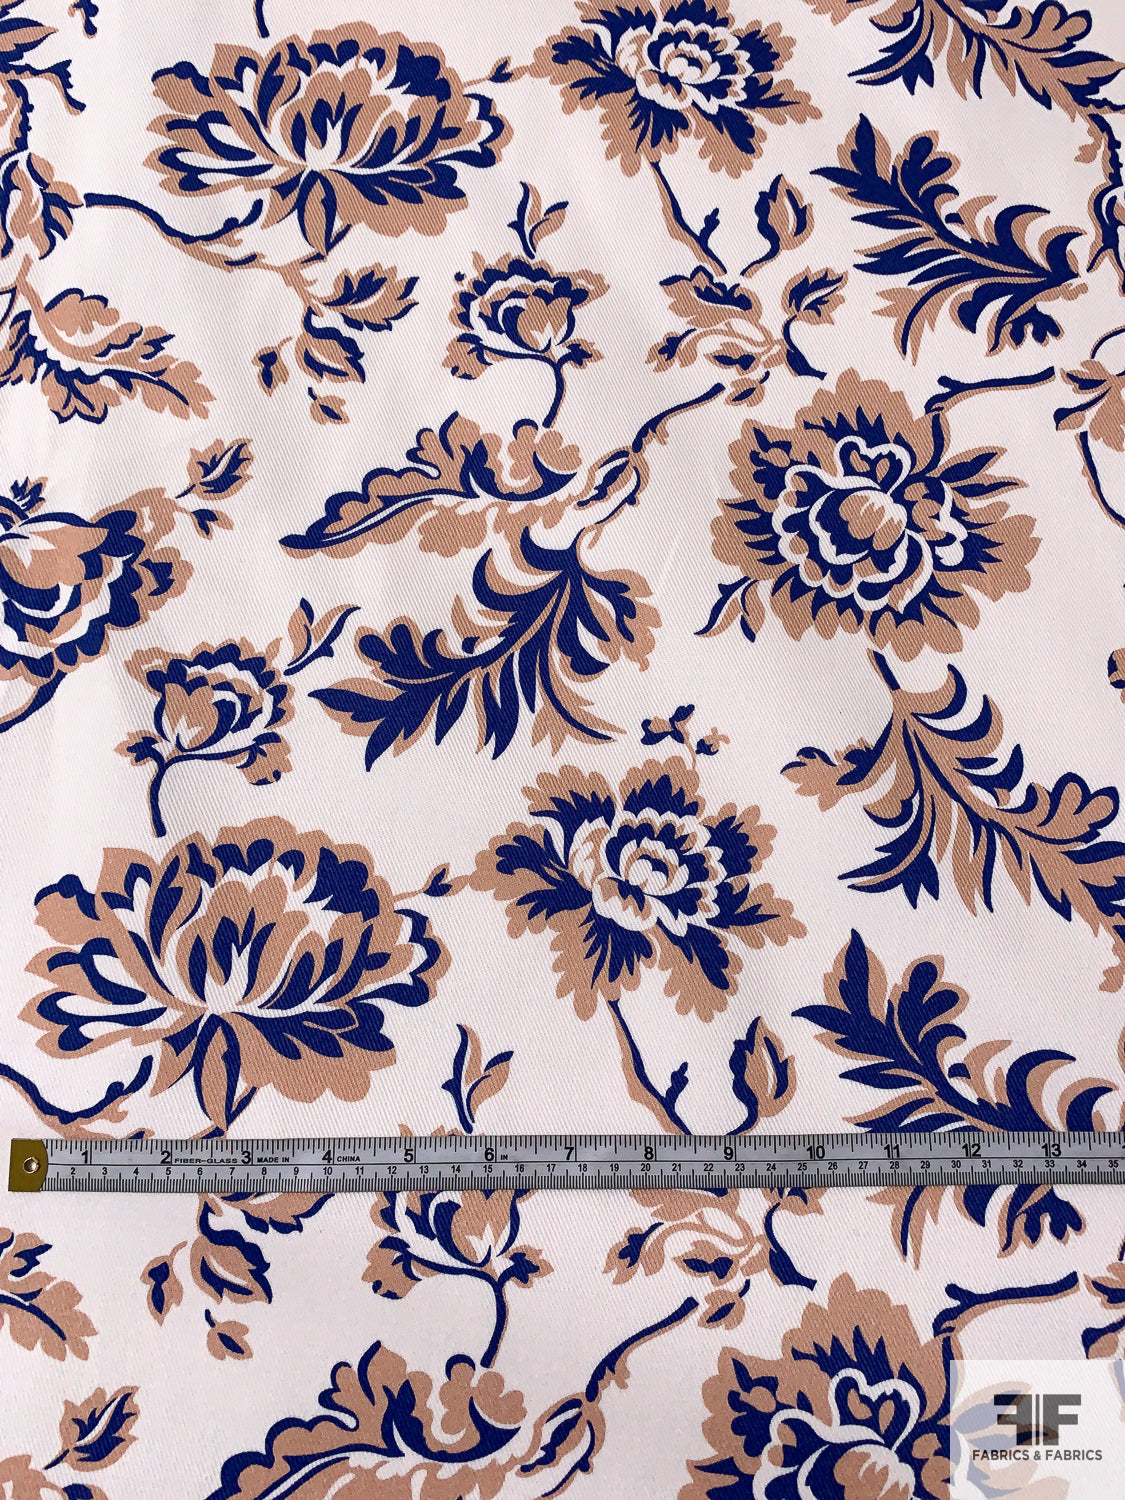 Italian Floral Printed Bottom-Weight Cotton Twill - Blue / Dusty Peach / Off-White